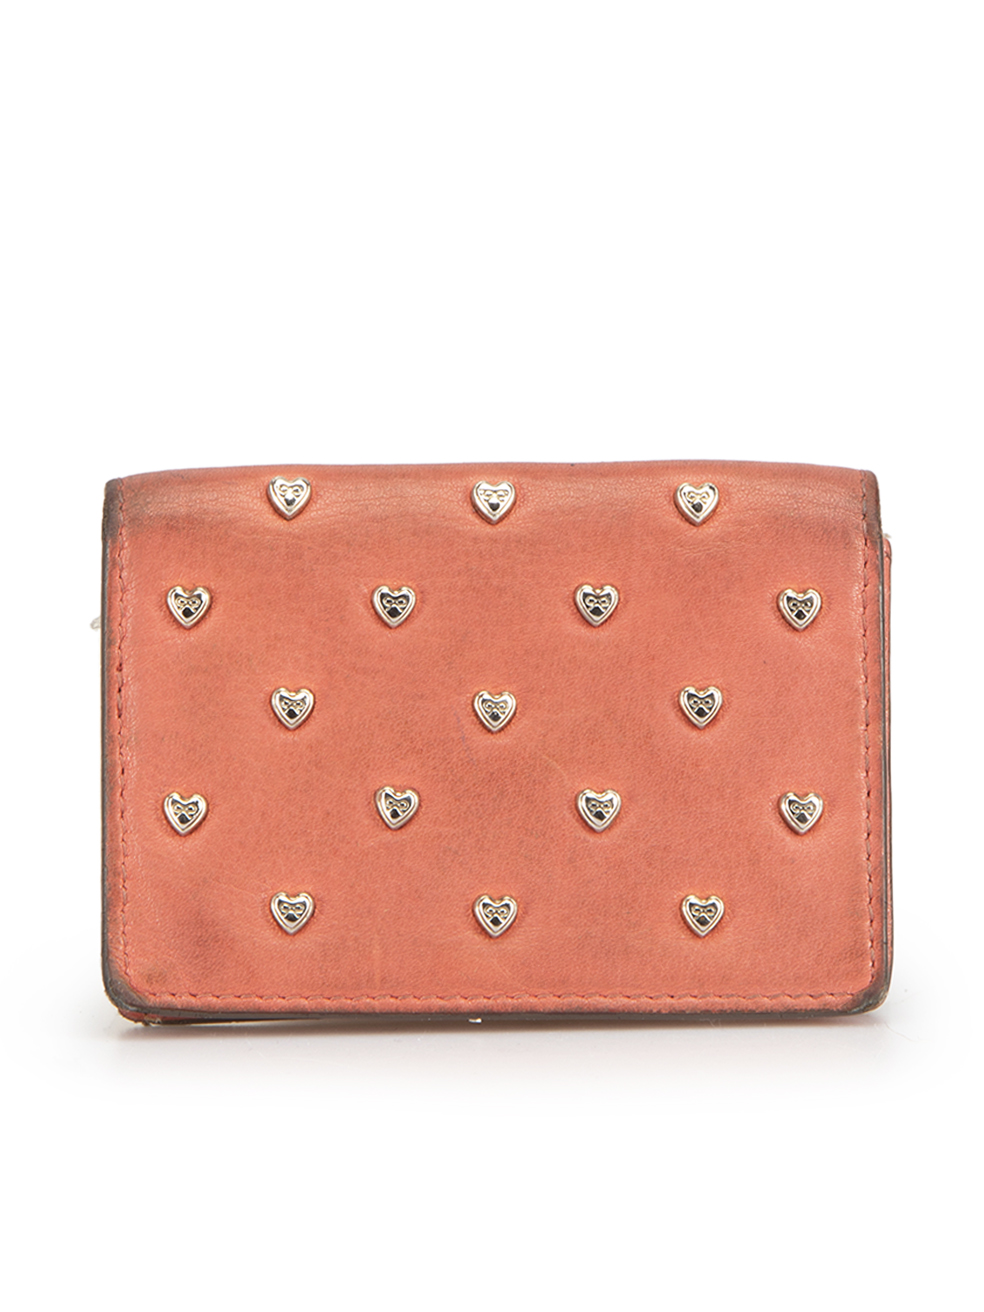 Coral Leather Joss Heart Studded Card Case